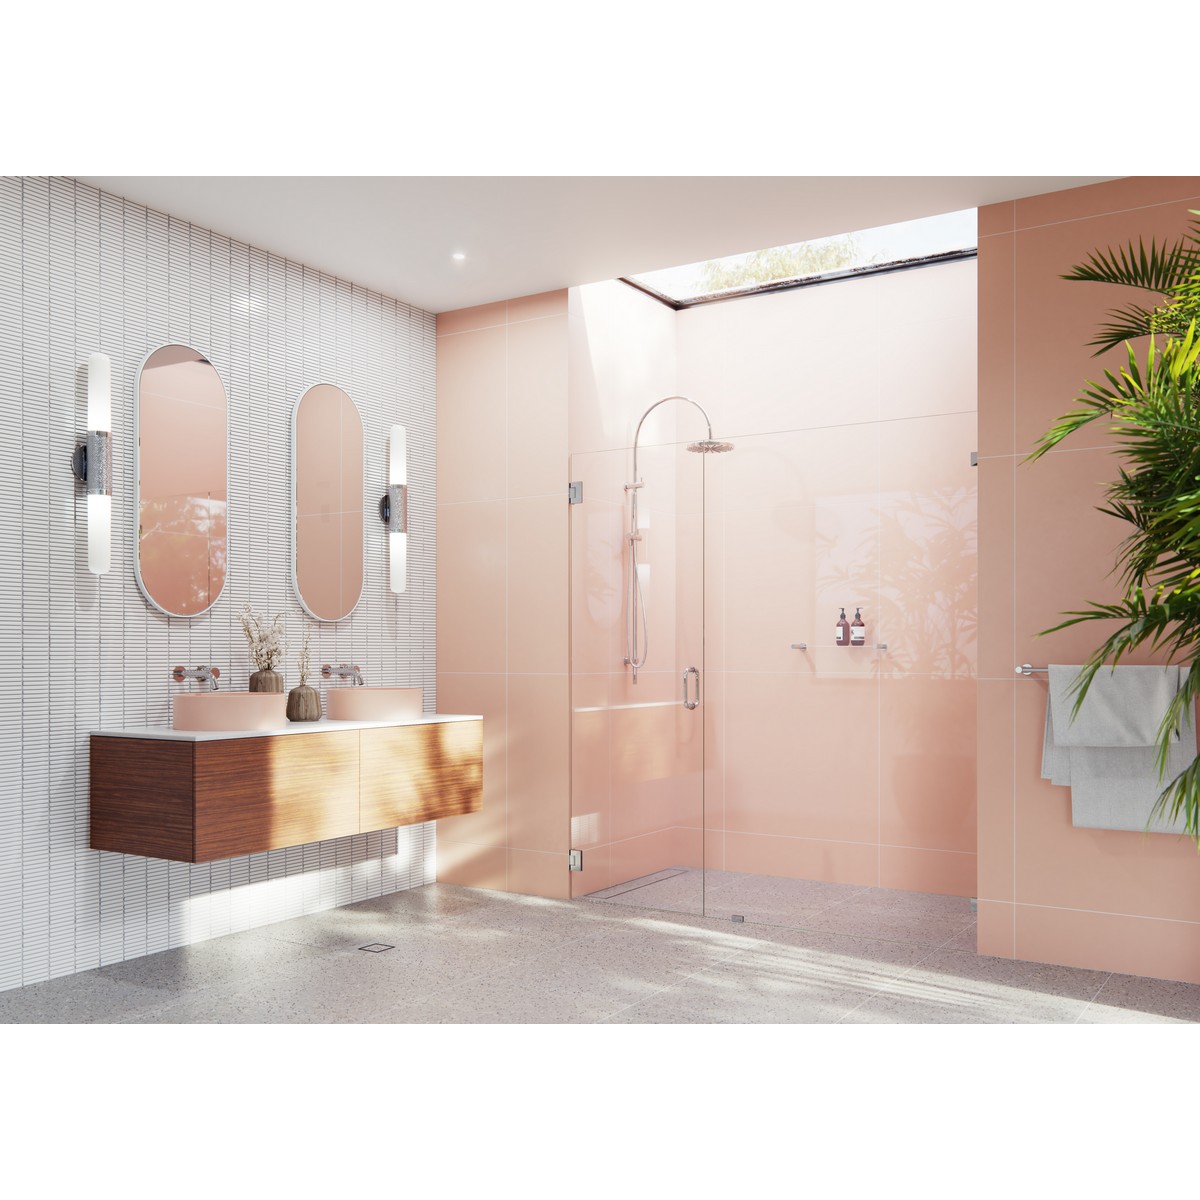 GLASS WAREHOUSE GW-WH-76 ILLUME 76 W X 78 H WALL HINGED FULLY FRAMELESS GLASS SHOWER ENCLOSURE